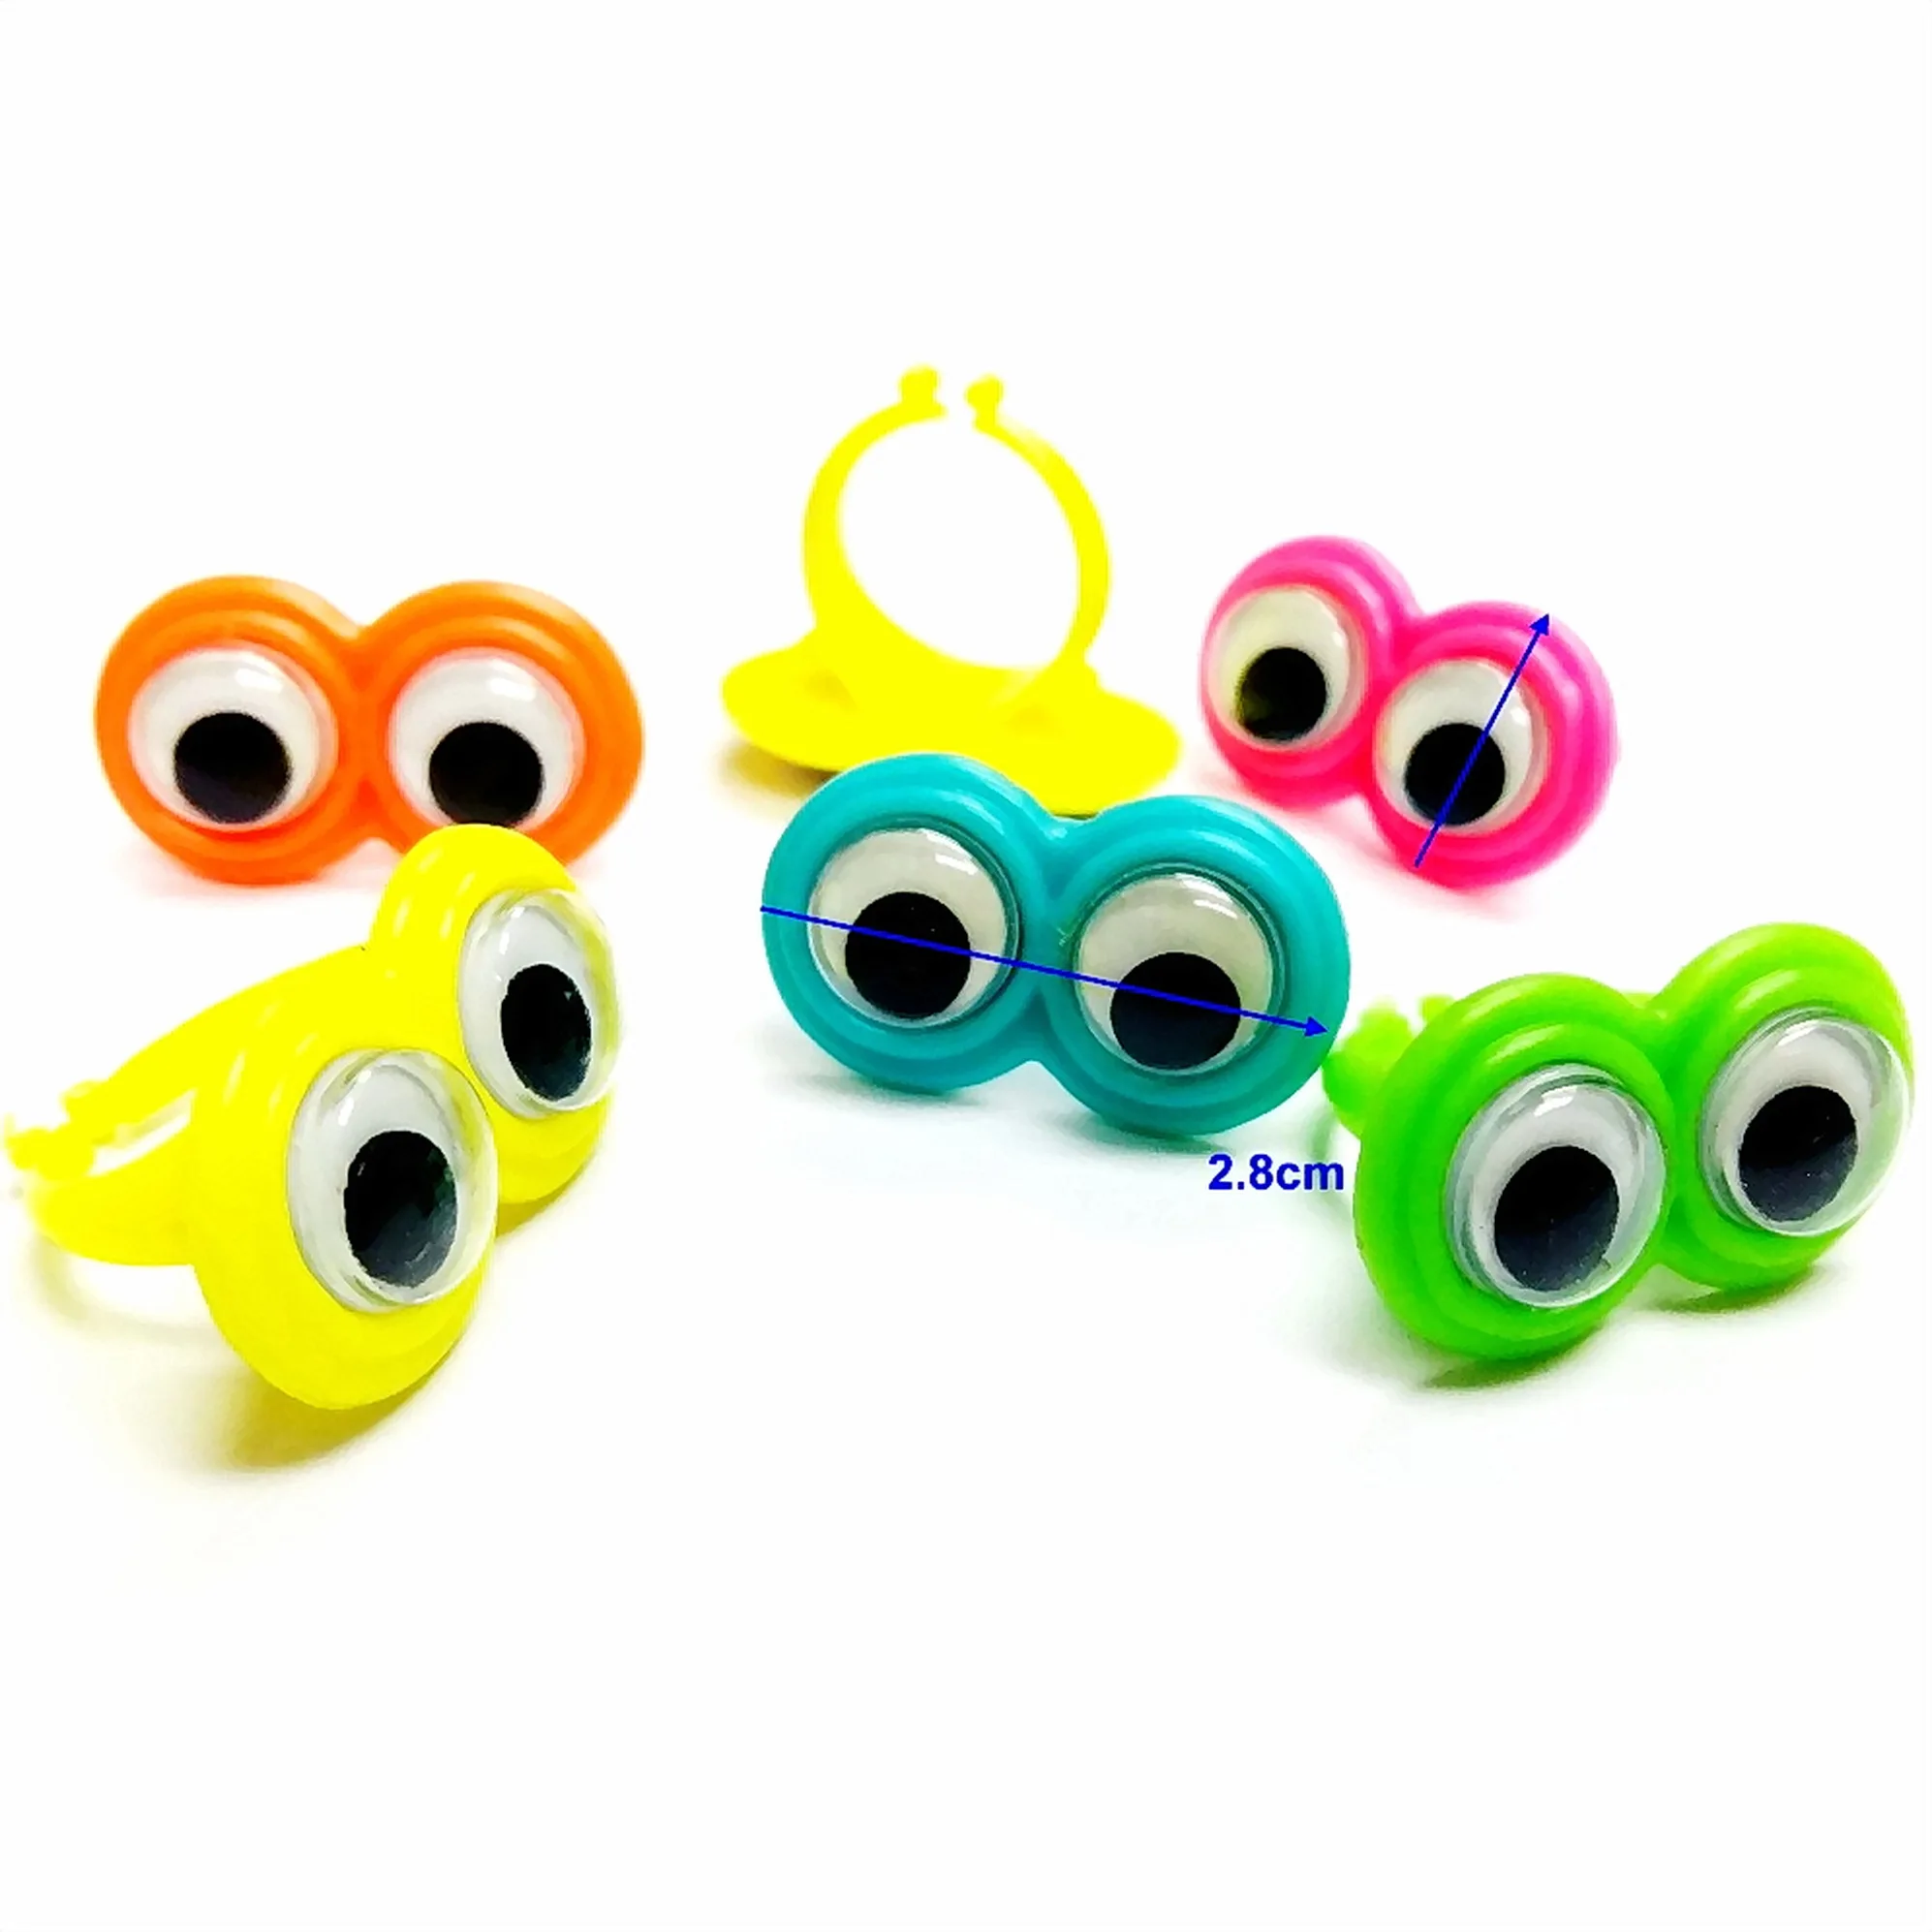 24 pc New Rings Pinata filler Birthday Party Favors Wholesales vending novelty 